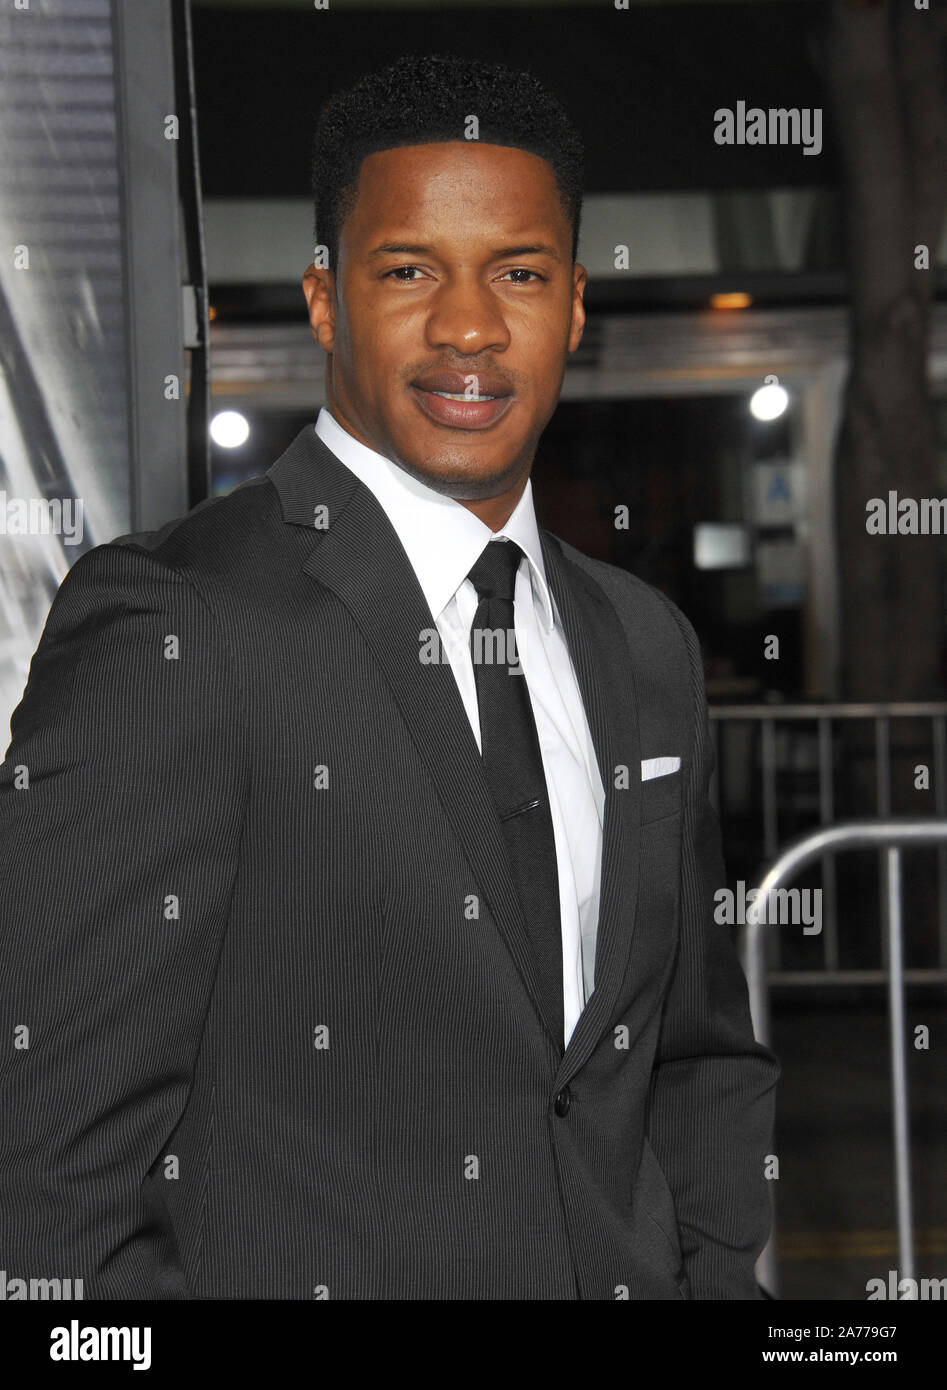 Nate Parker At Arrivals For The Great Debaters New York, 44% OFF